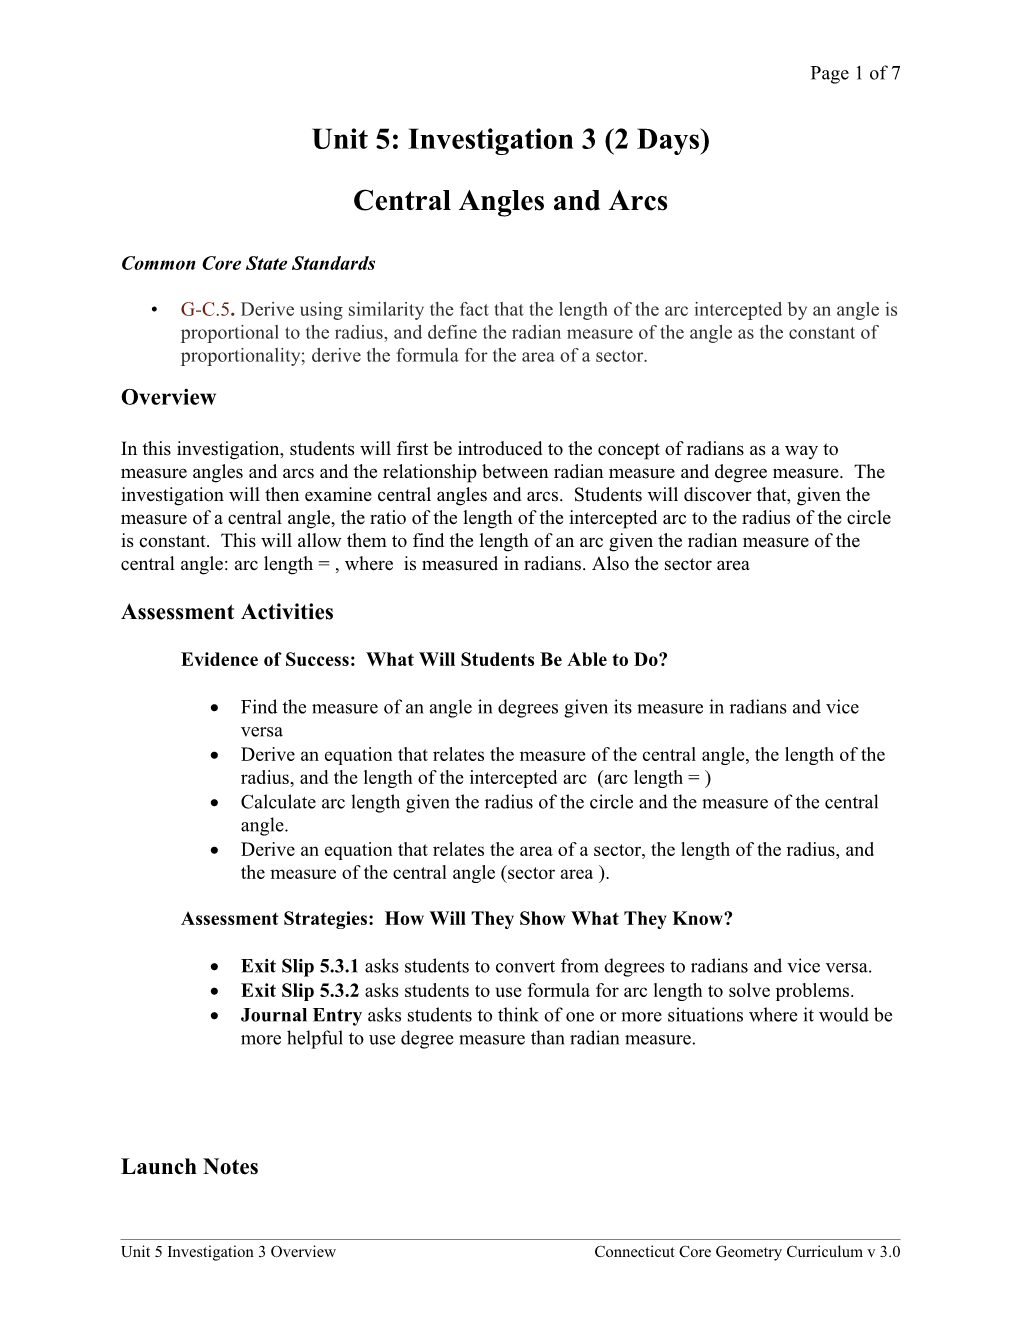 Central Angles and Arcs